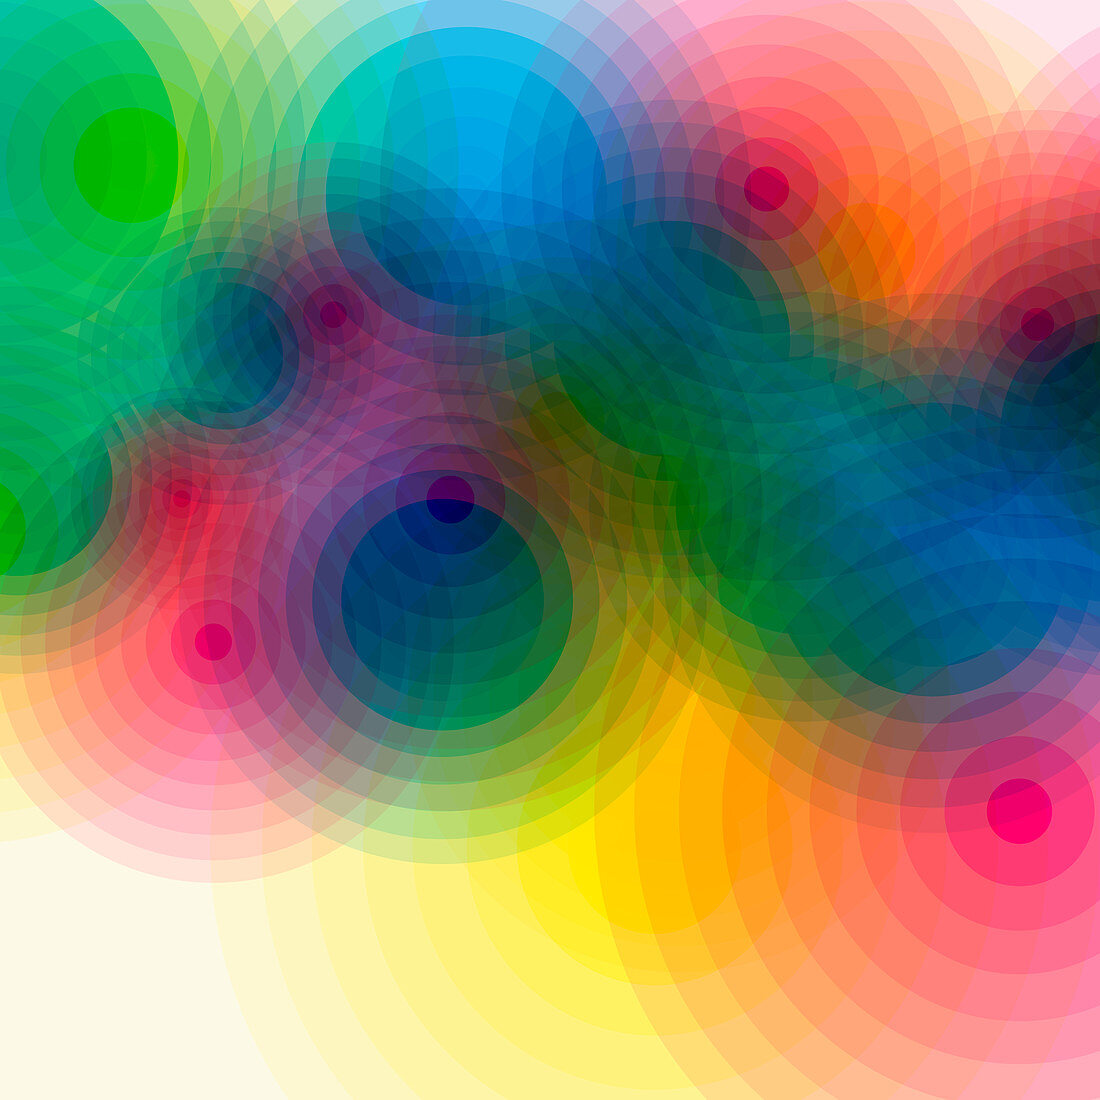 Abstract defocussed pattern of circles, illustration